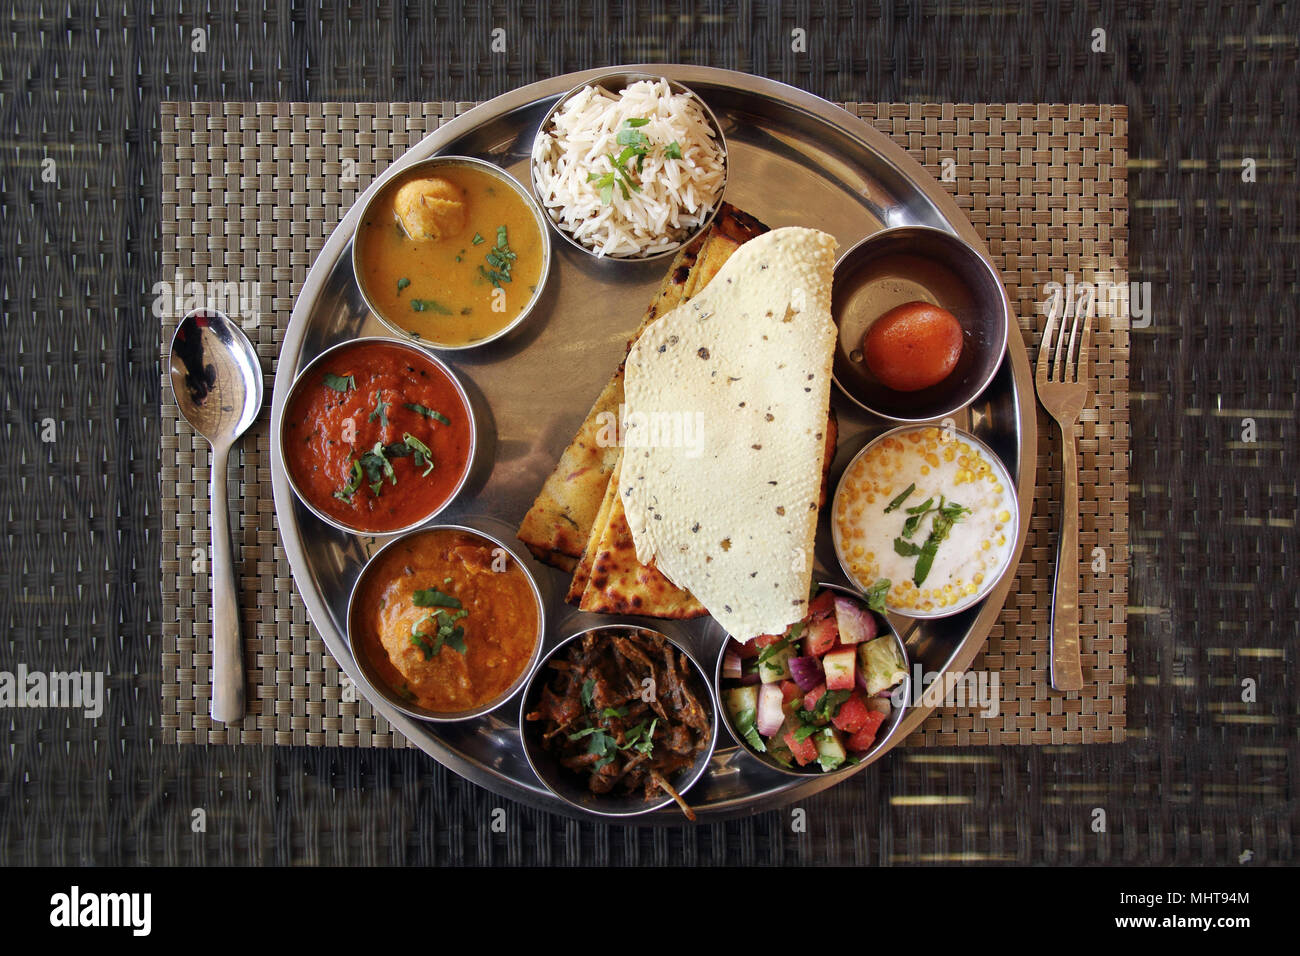 Typical indian food from Jaipur - thali rajasthani Stock Photo